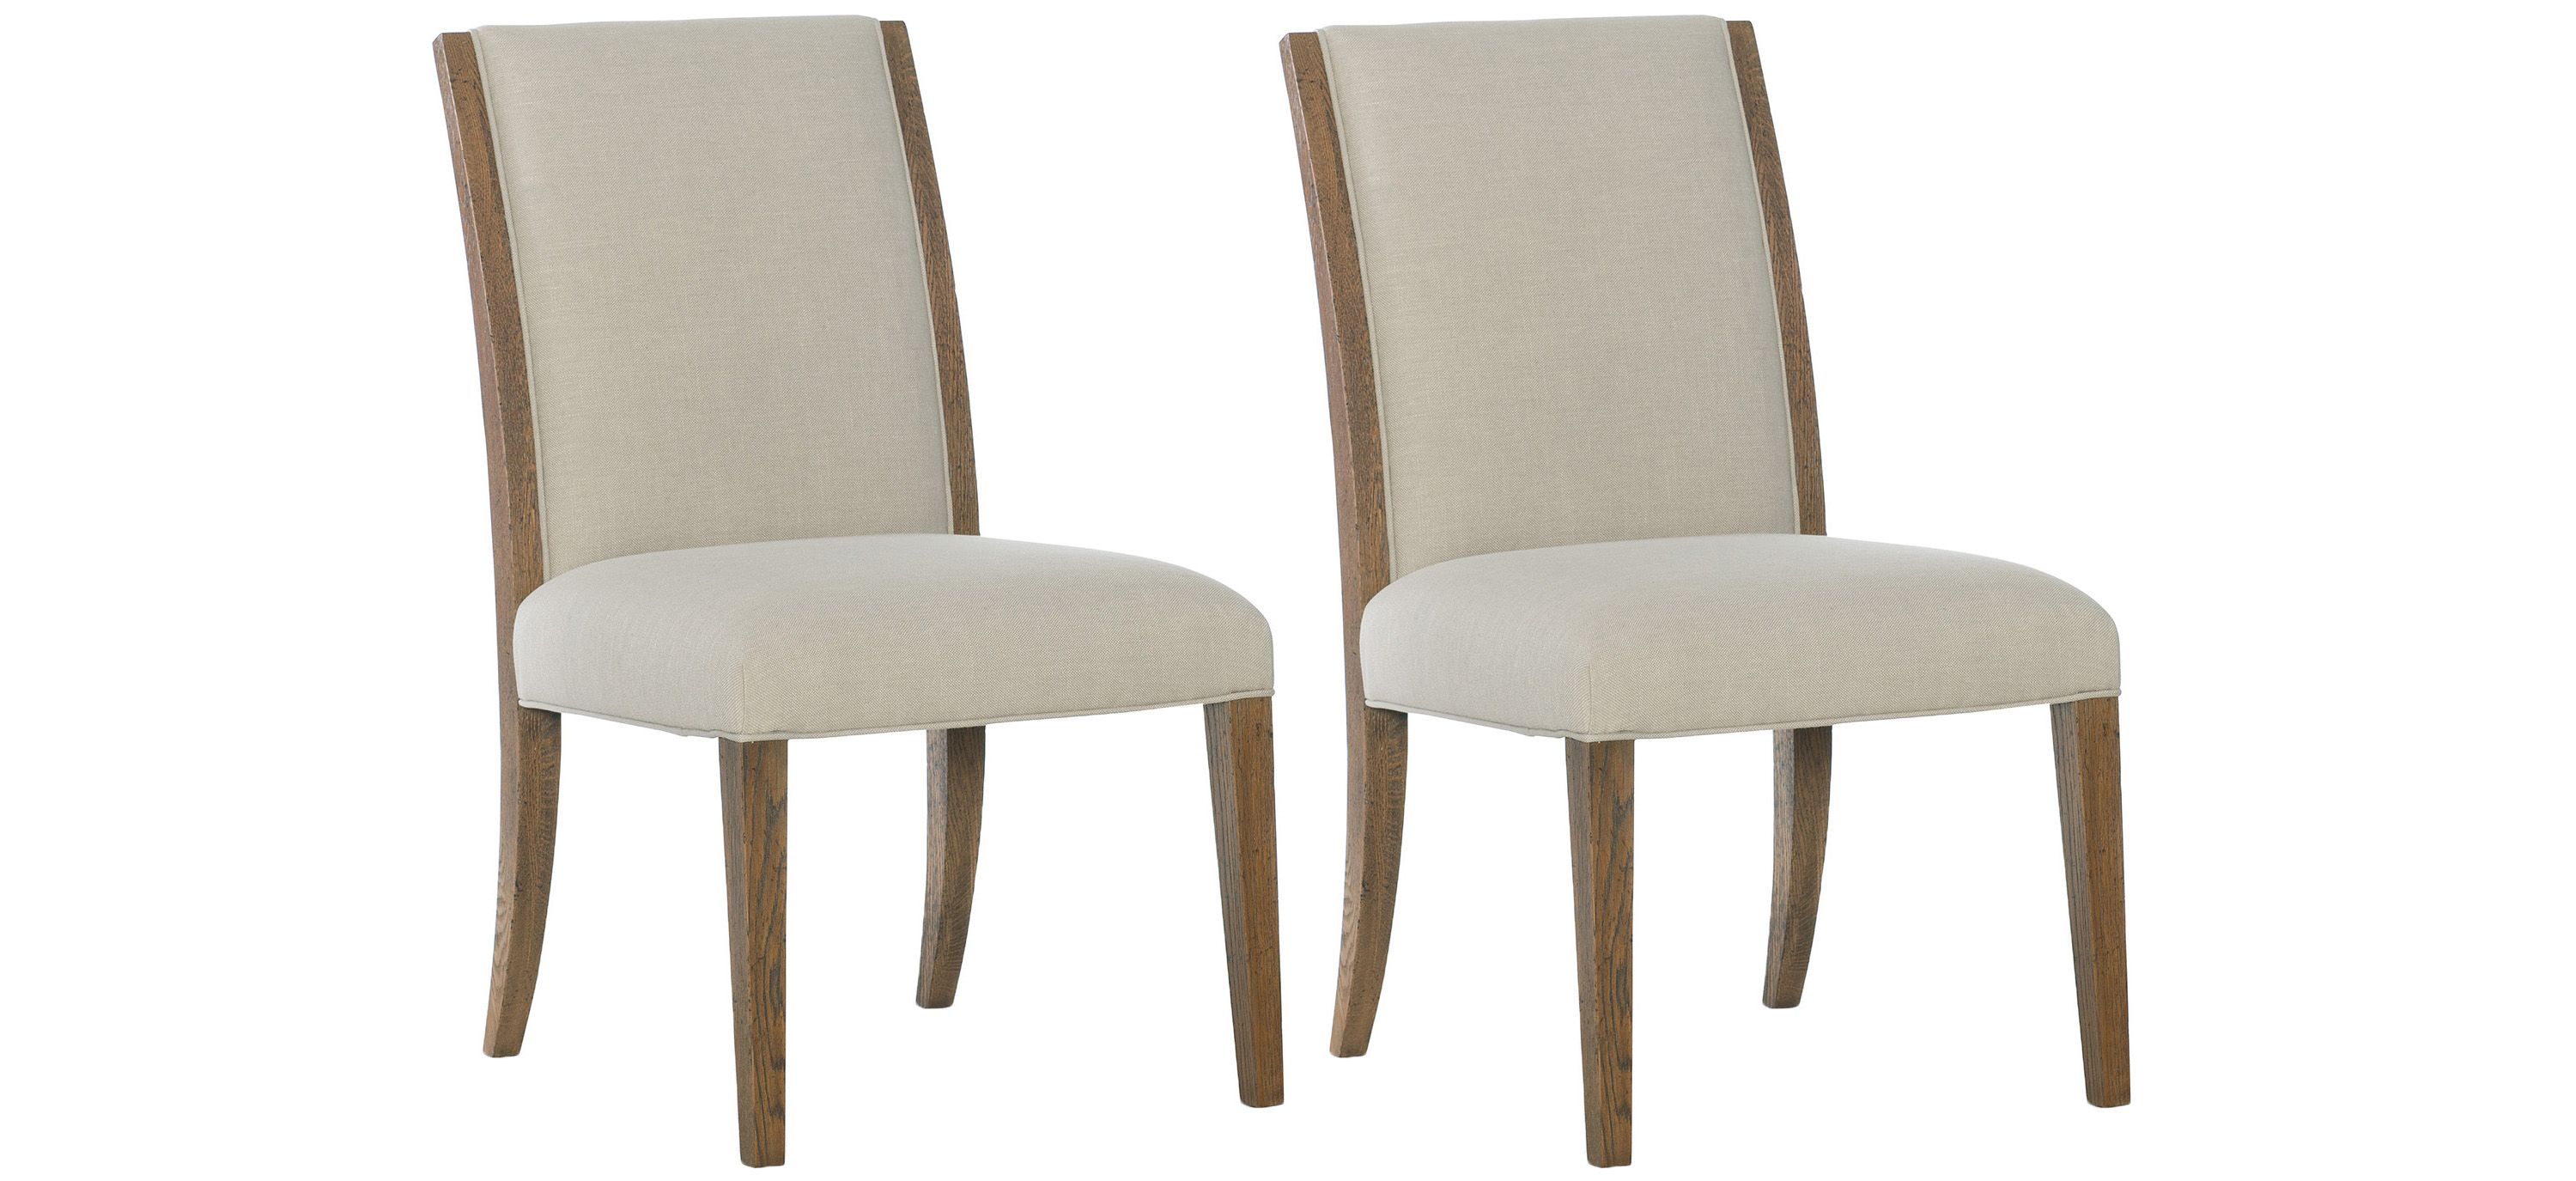 Chapman Upholstered Side Chair-Set of 2